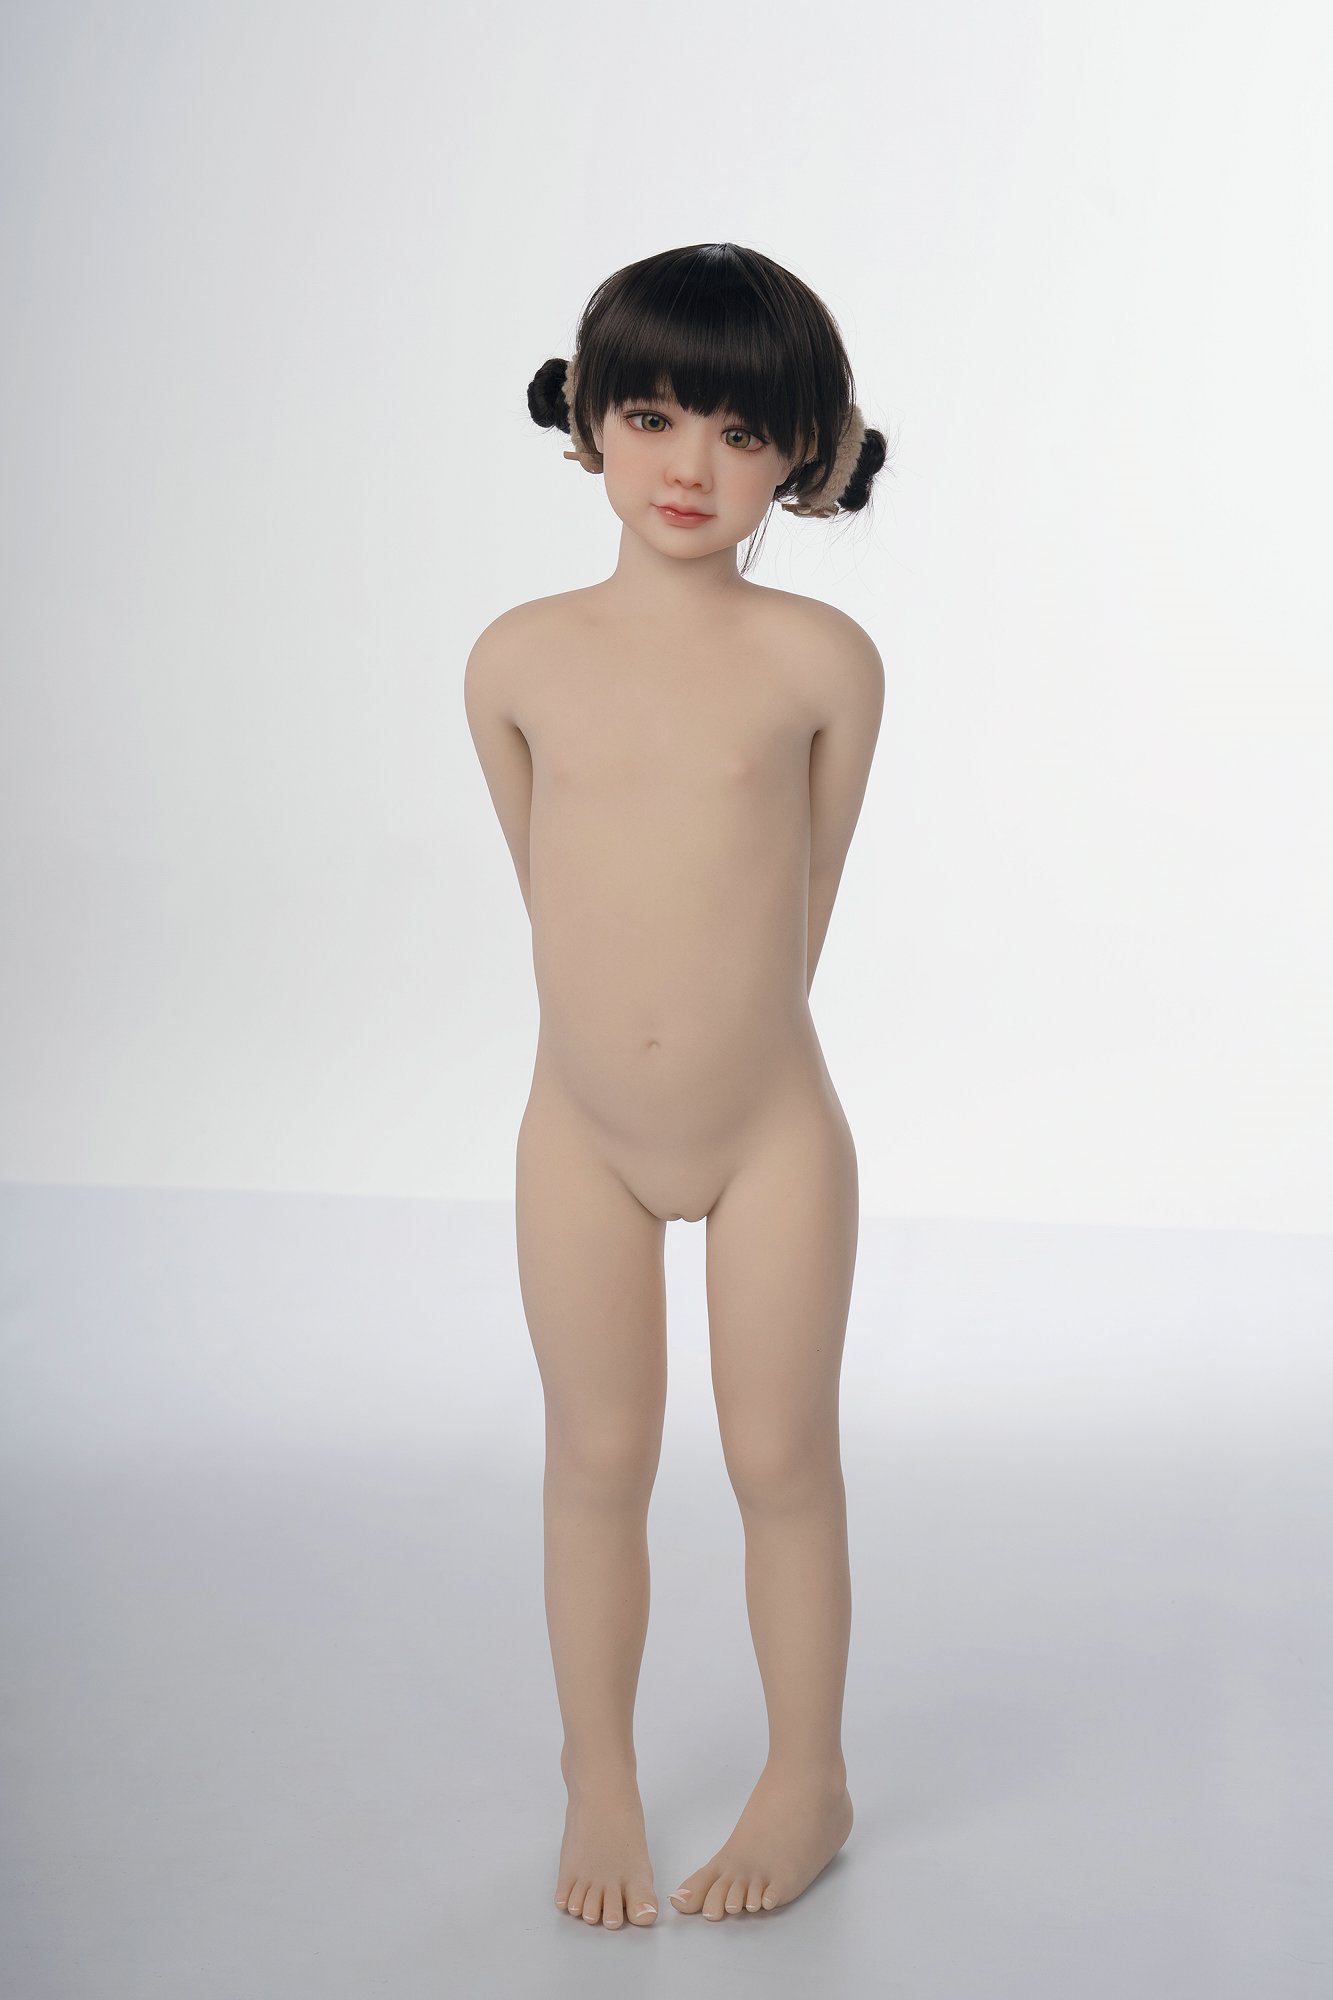 skinny lifesize young love doll